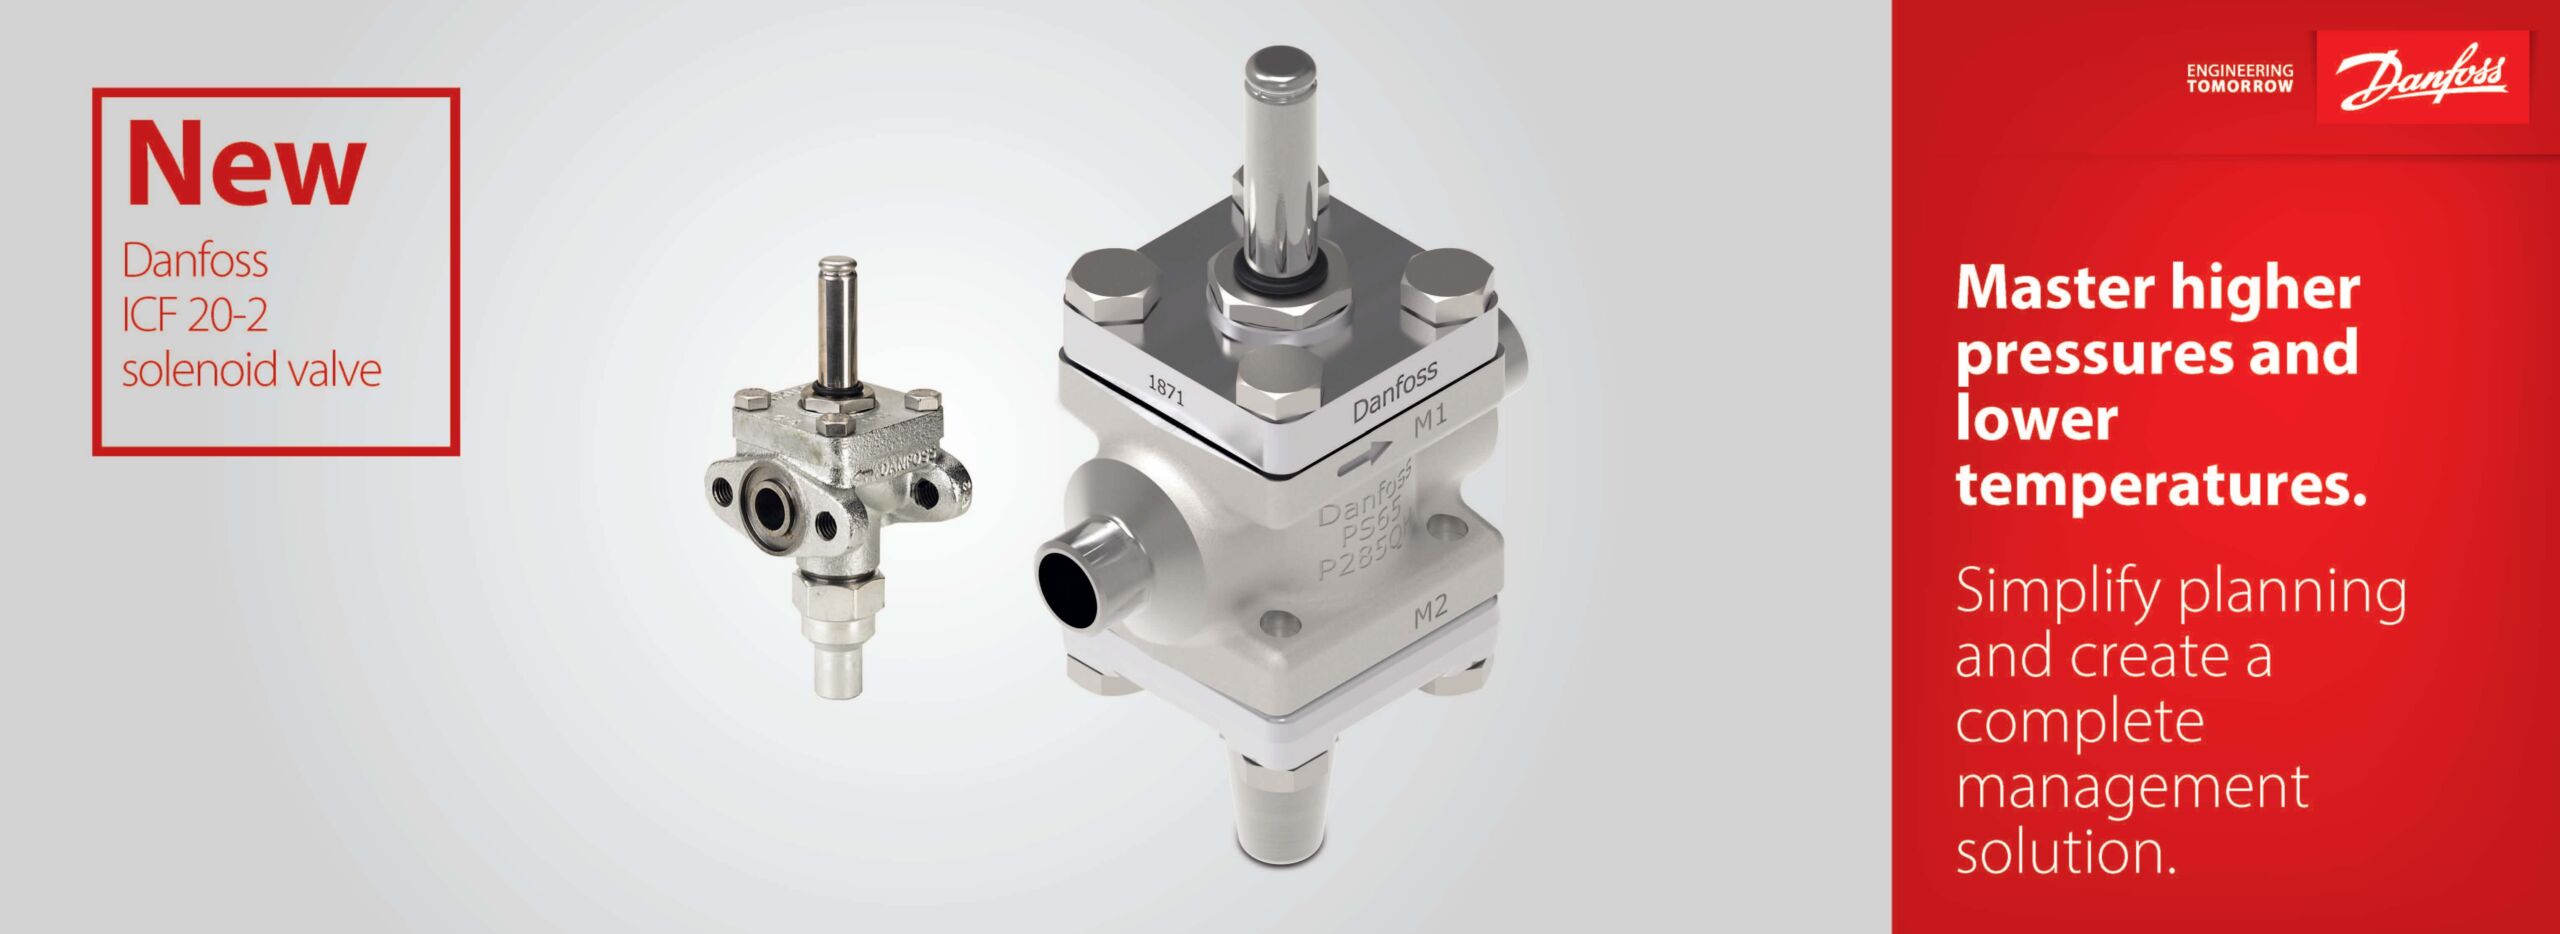 Introducing the new ICF 20-2 solenoid valve